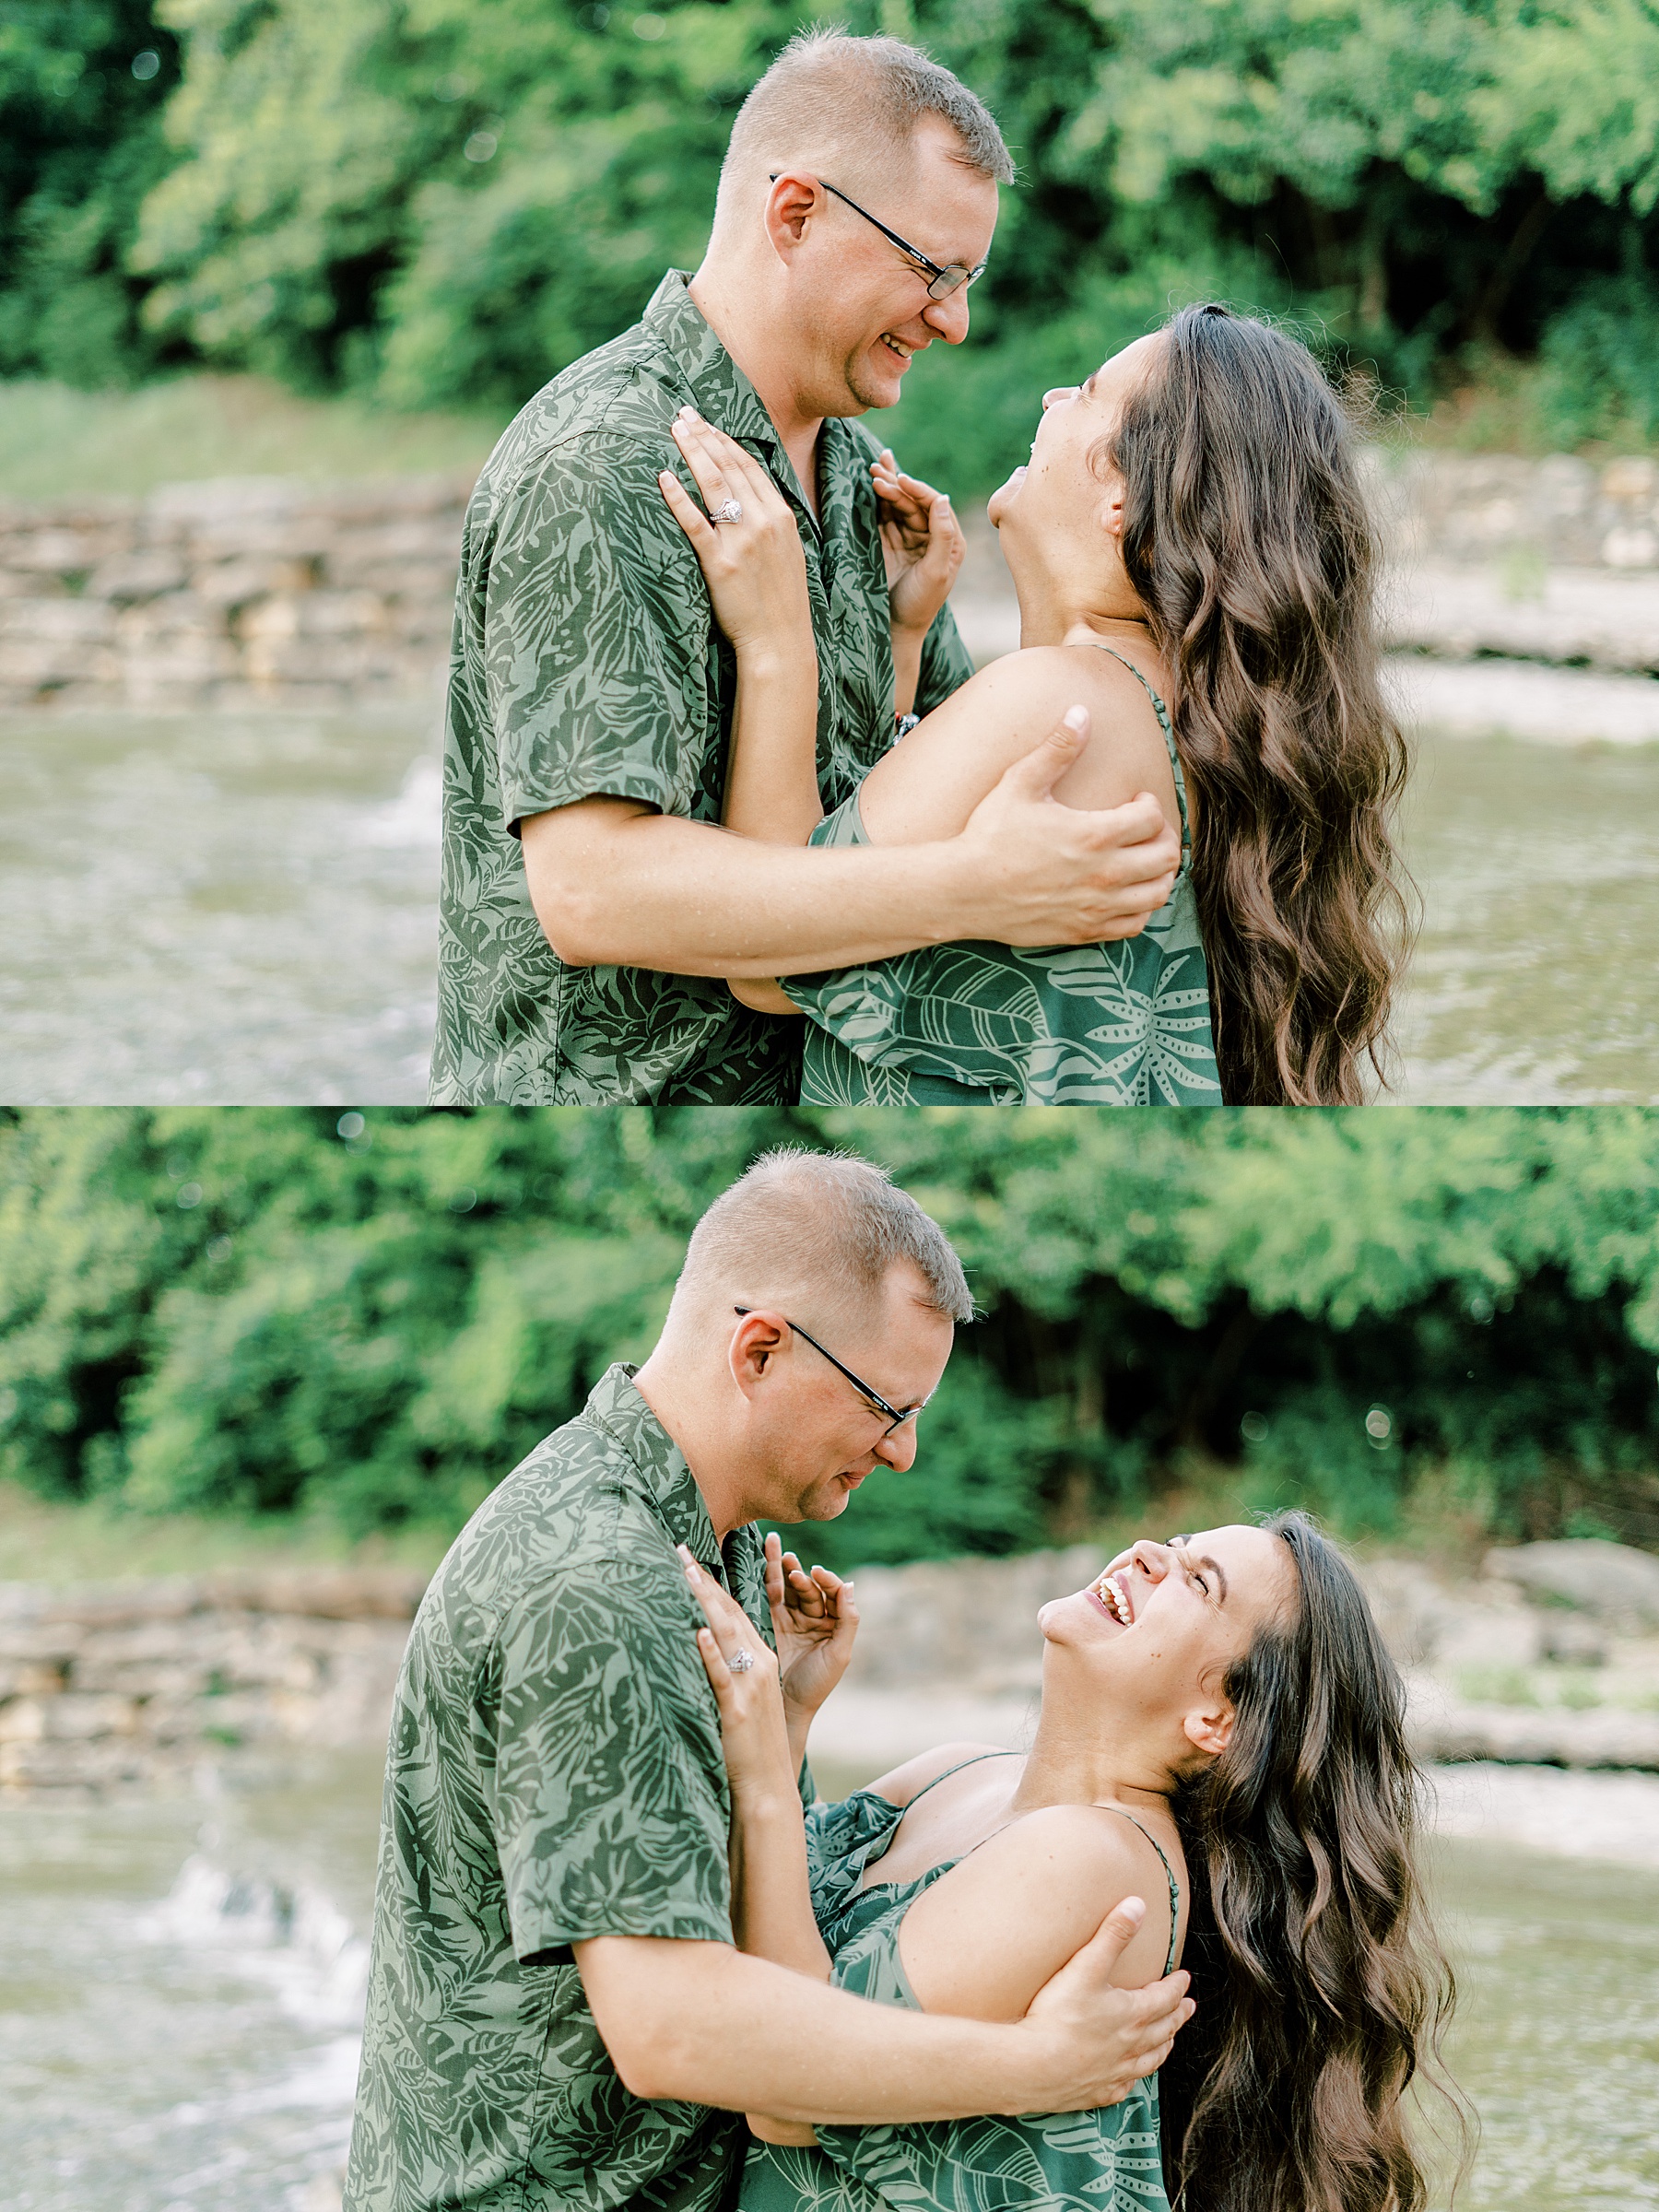 Couple embracing and giggling with each other